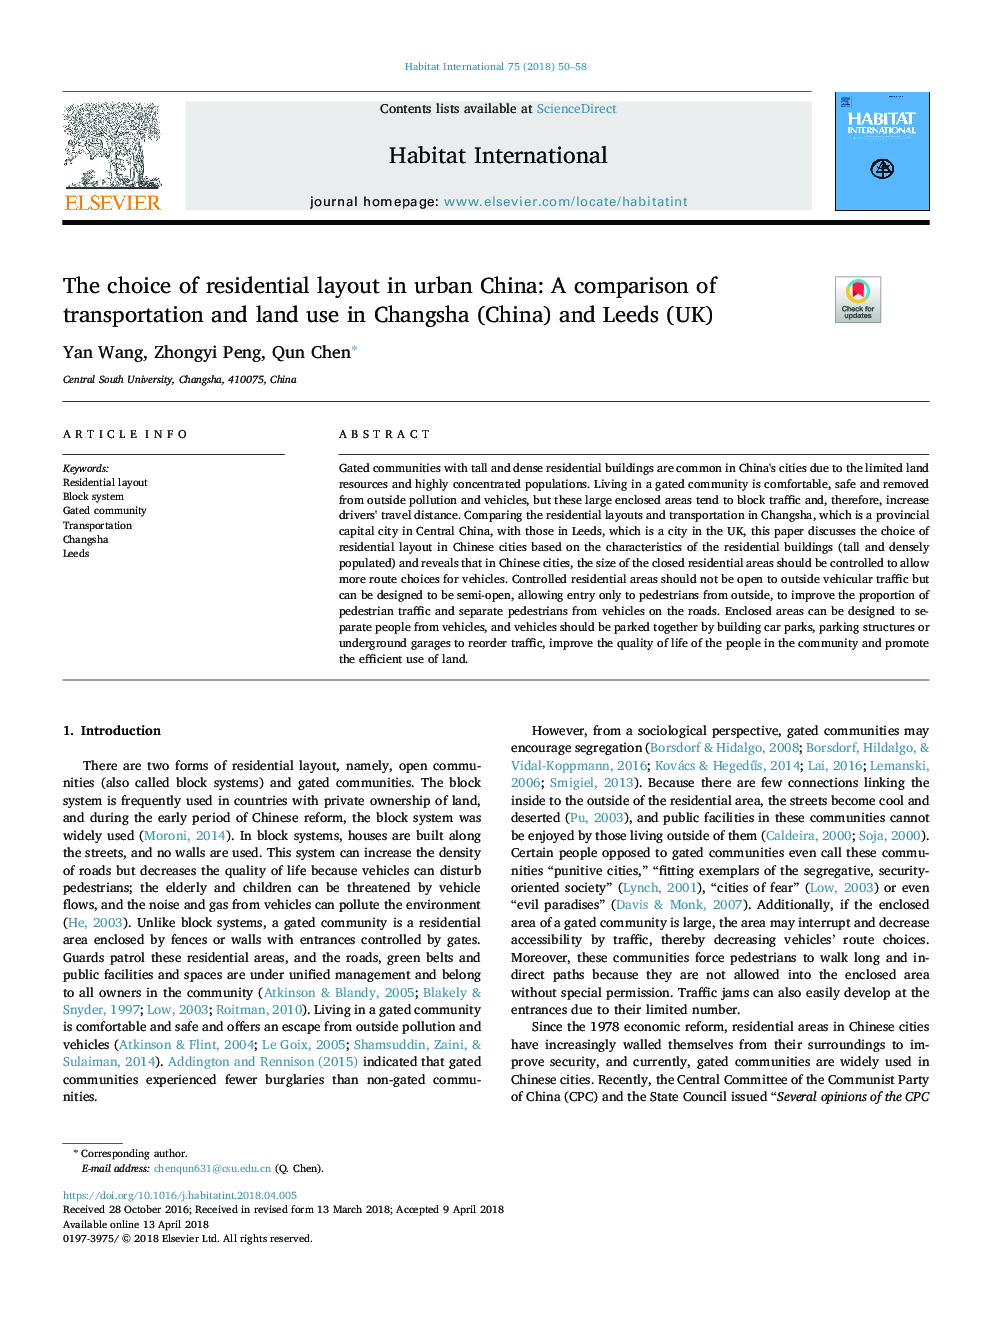 The choice of residential layout in urban China: A comparison of transportation and land use in Changsha (China) and Leeds (UK)